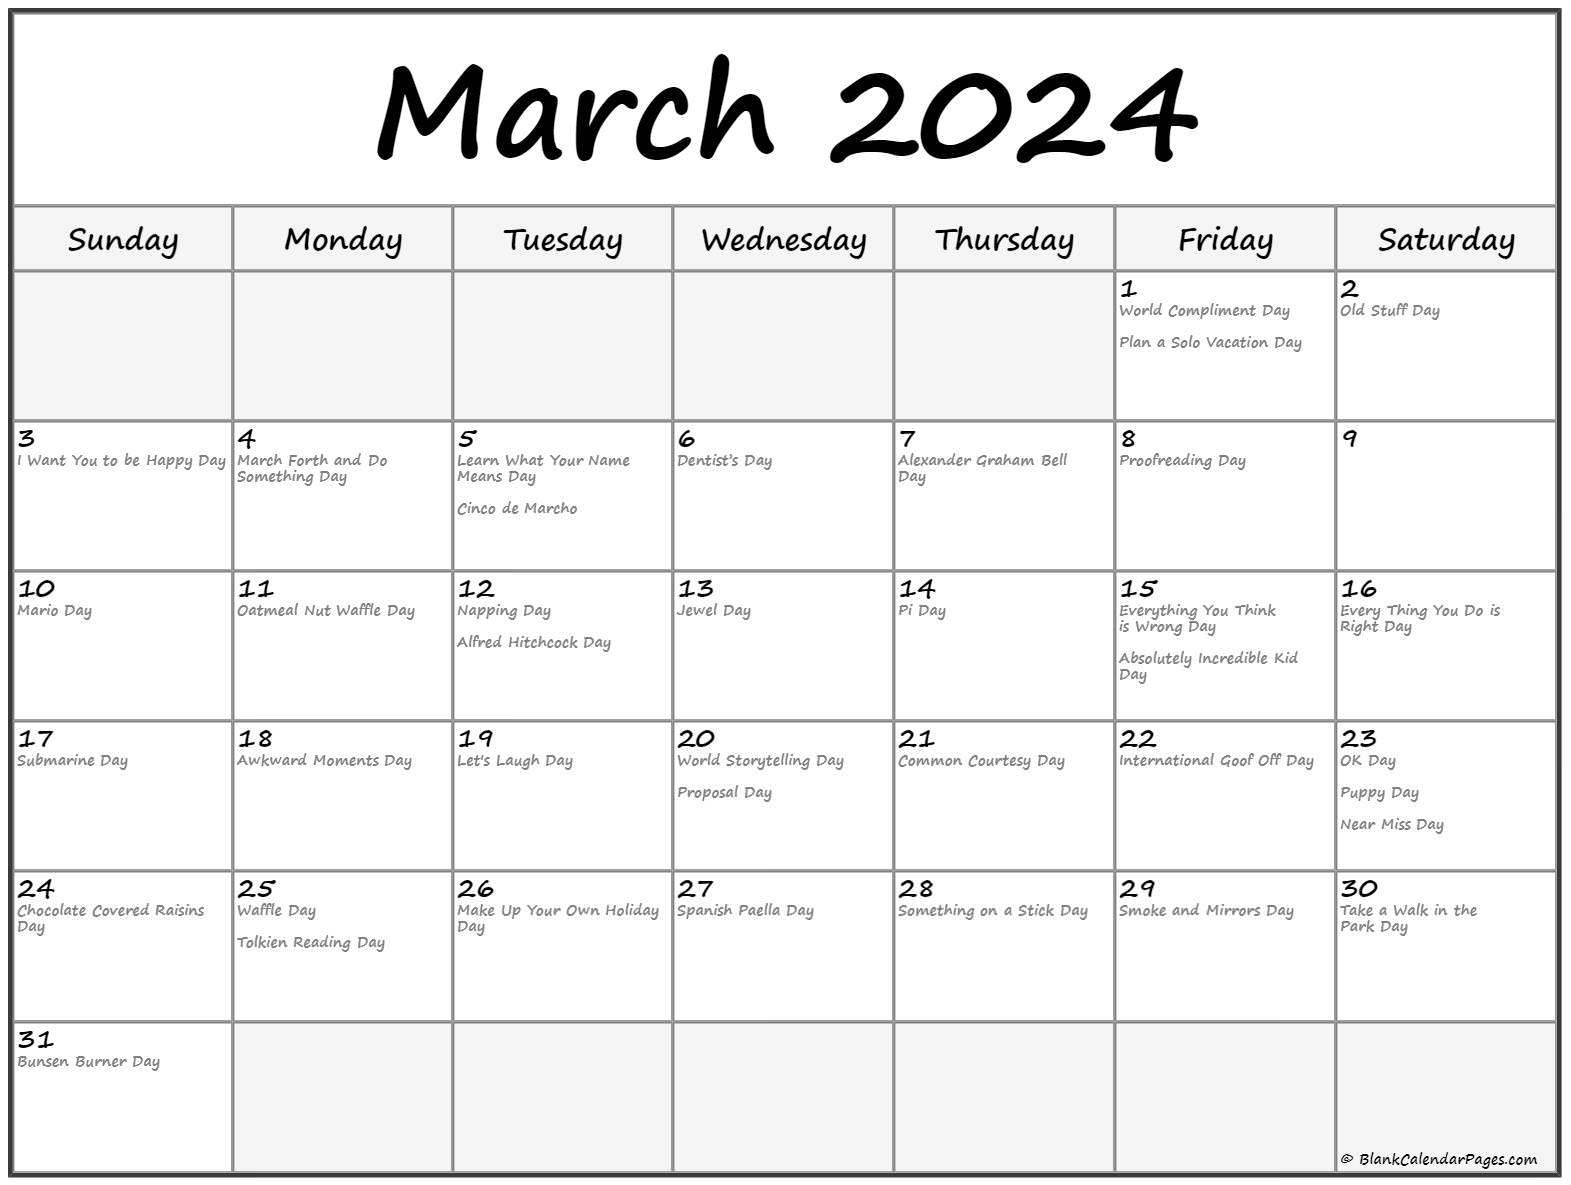 National Day Calendar 2022 March March 2022 With Holidays Calendar